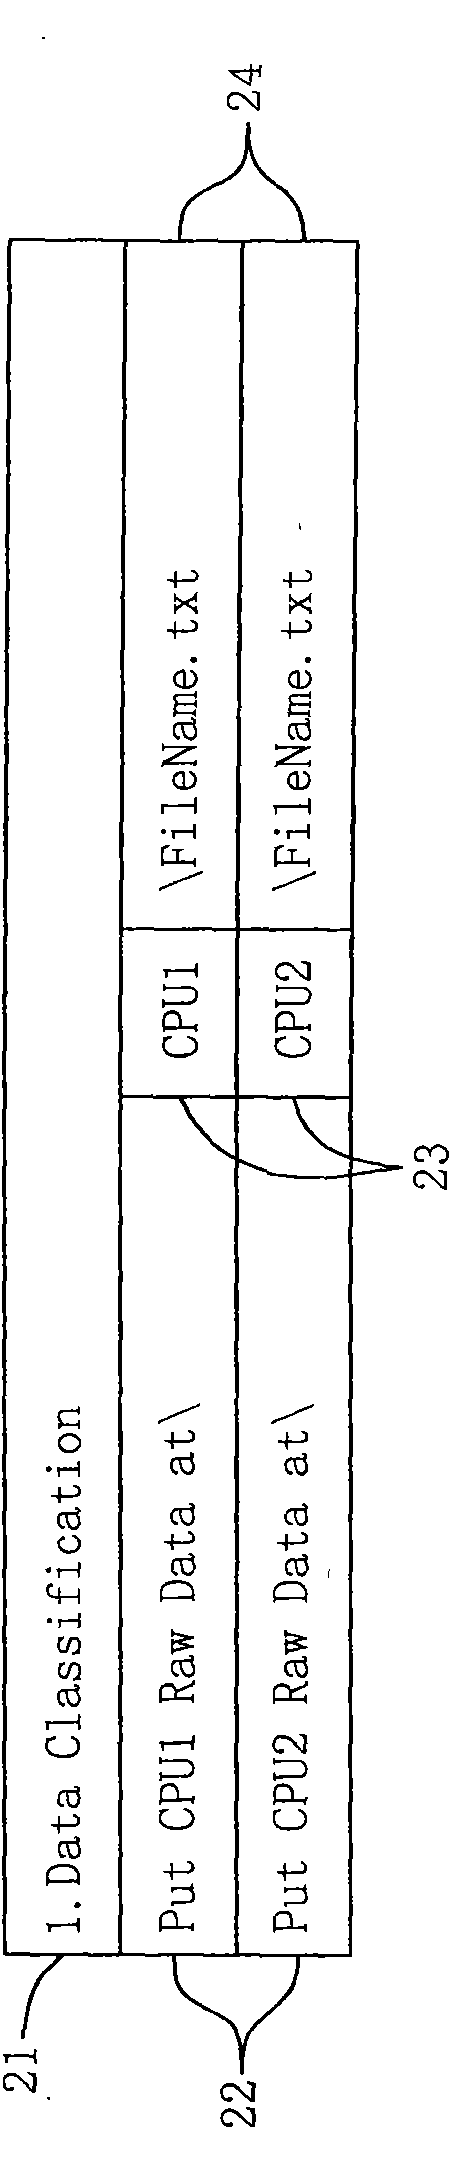 Method for quick path interconnect (QPI) automatic data arranging tool